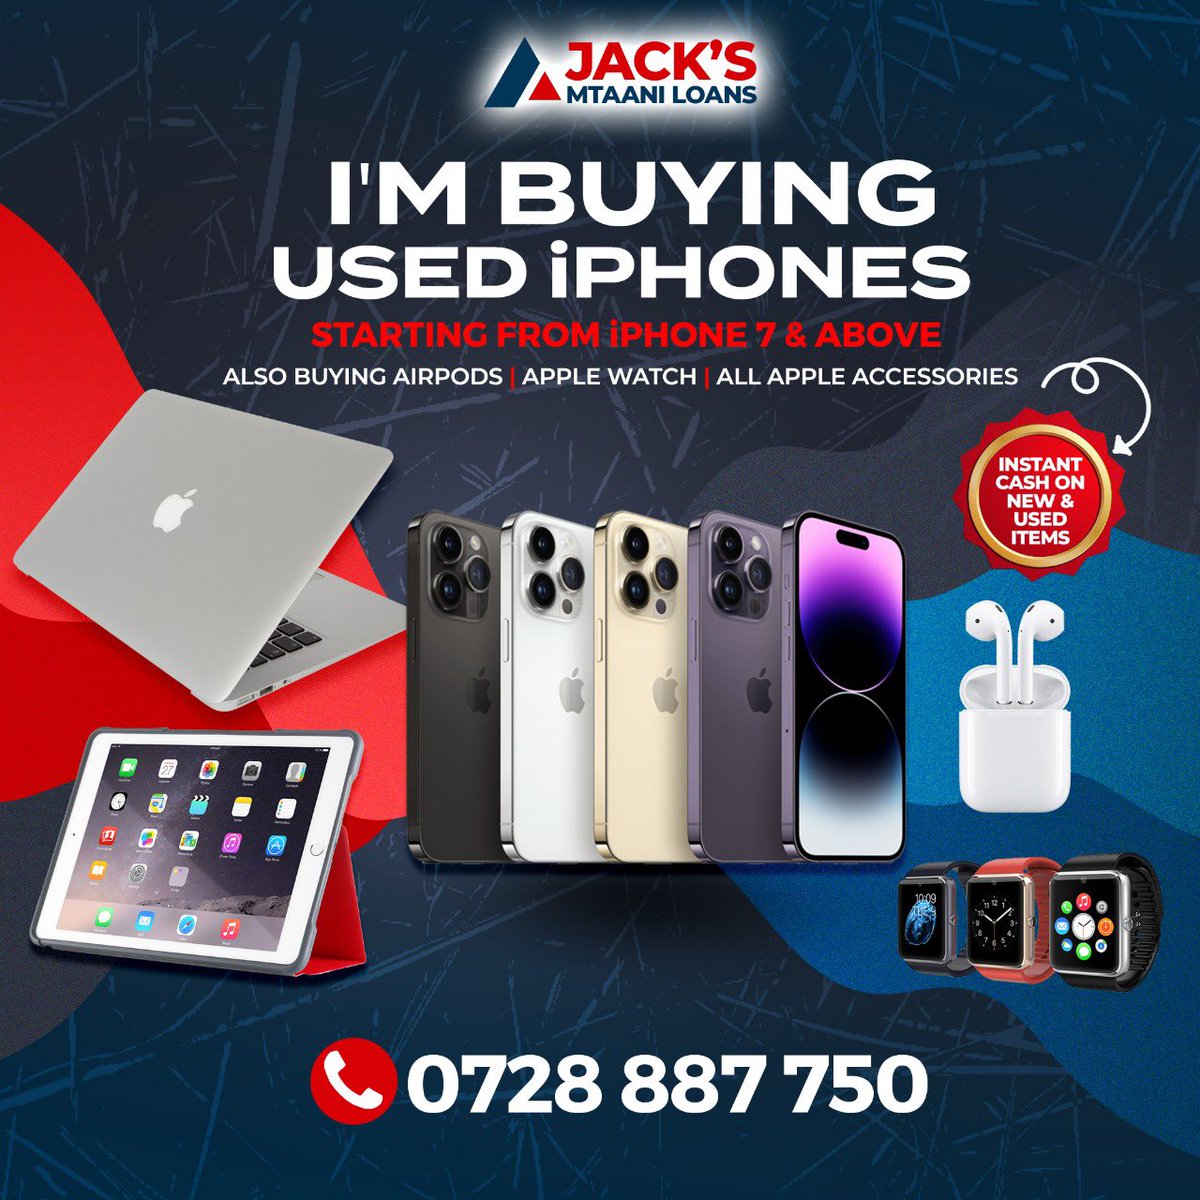 Hi Sasa, I’m buying used iPhones,MacBooks,iPads,AirPods and Apple Watches.
Instant Cash.☎️0728887750 Call or WhatsApp.
You can Also get Weekly Loans with your Apple Gadget as Security.Karibu

/KES 15.19 Richard Ngatia #ShakaholaMassacre Moses Kuria FA CUP #NikujaribuTu boutross/